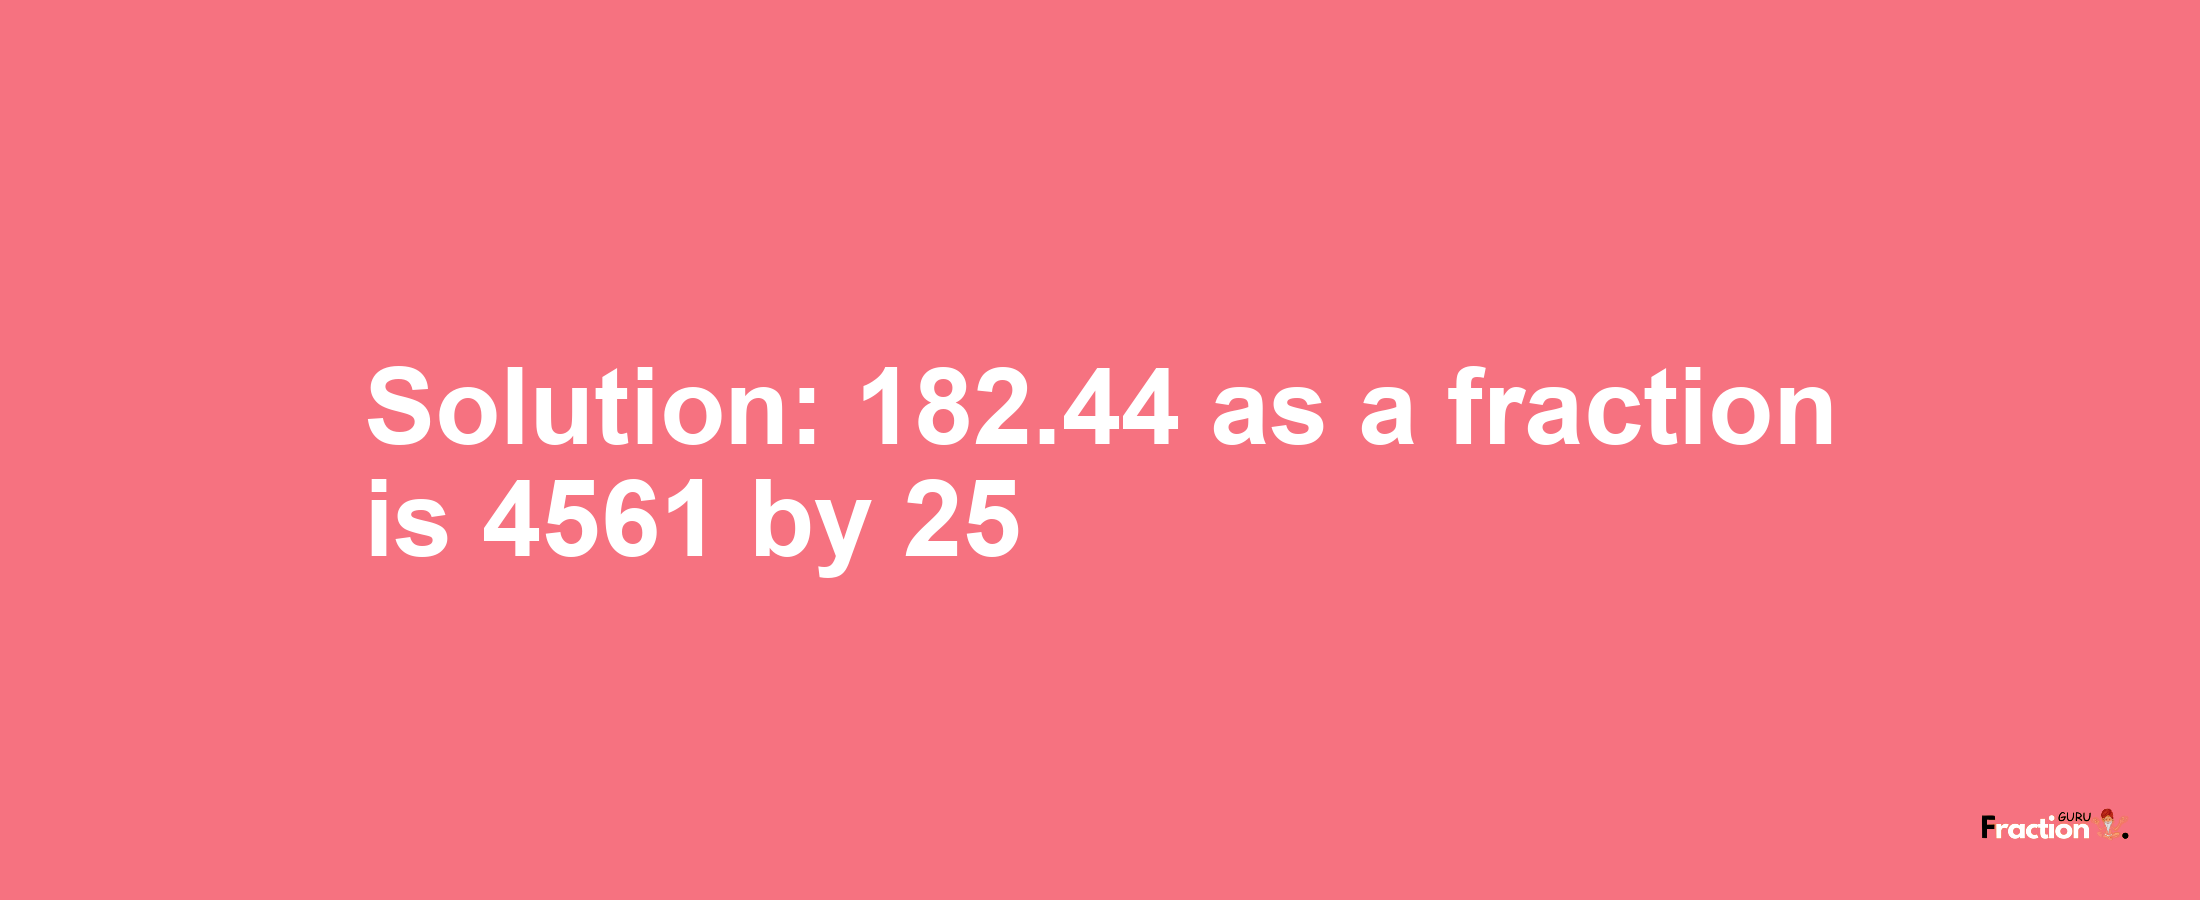 Solution:182.44 as a fraction is 4561/25